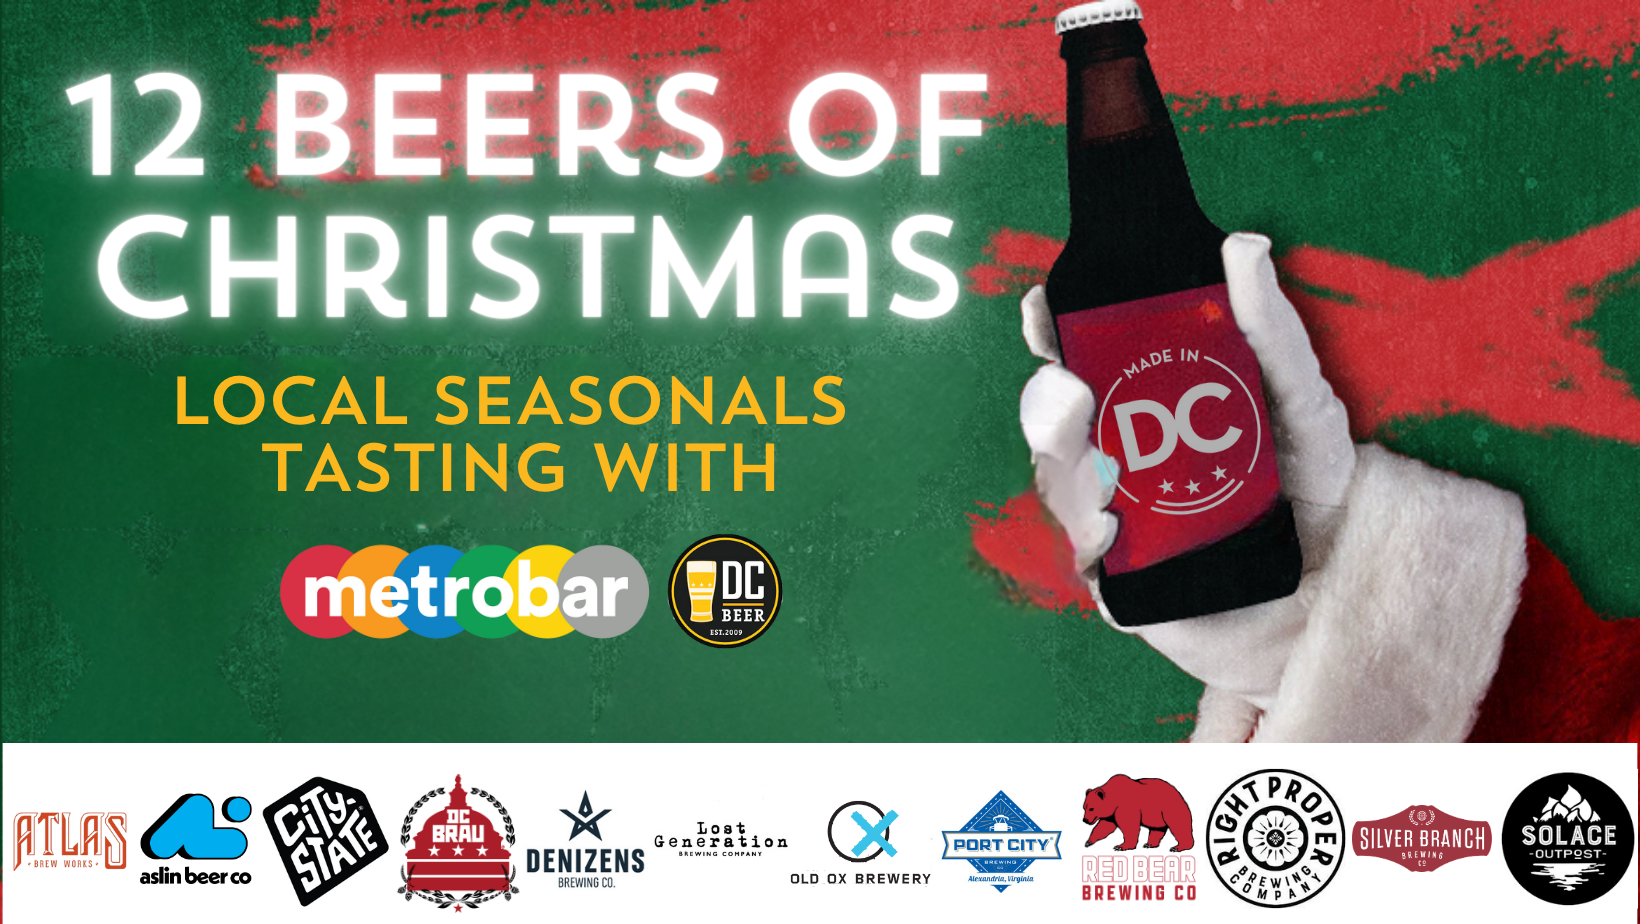 12 Beers of Christmas: A Local Seasonals Tasting with DC Beer